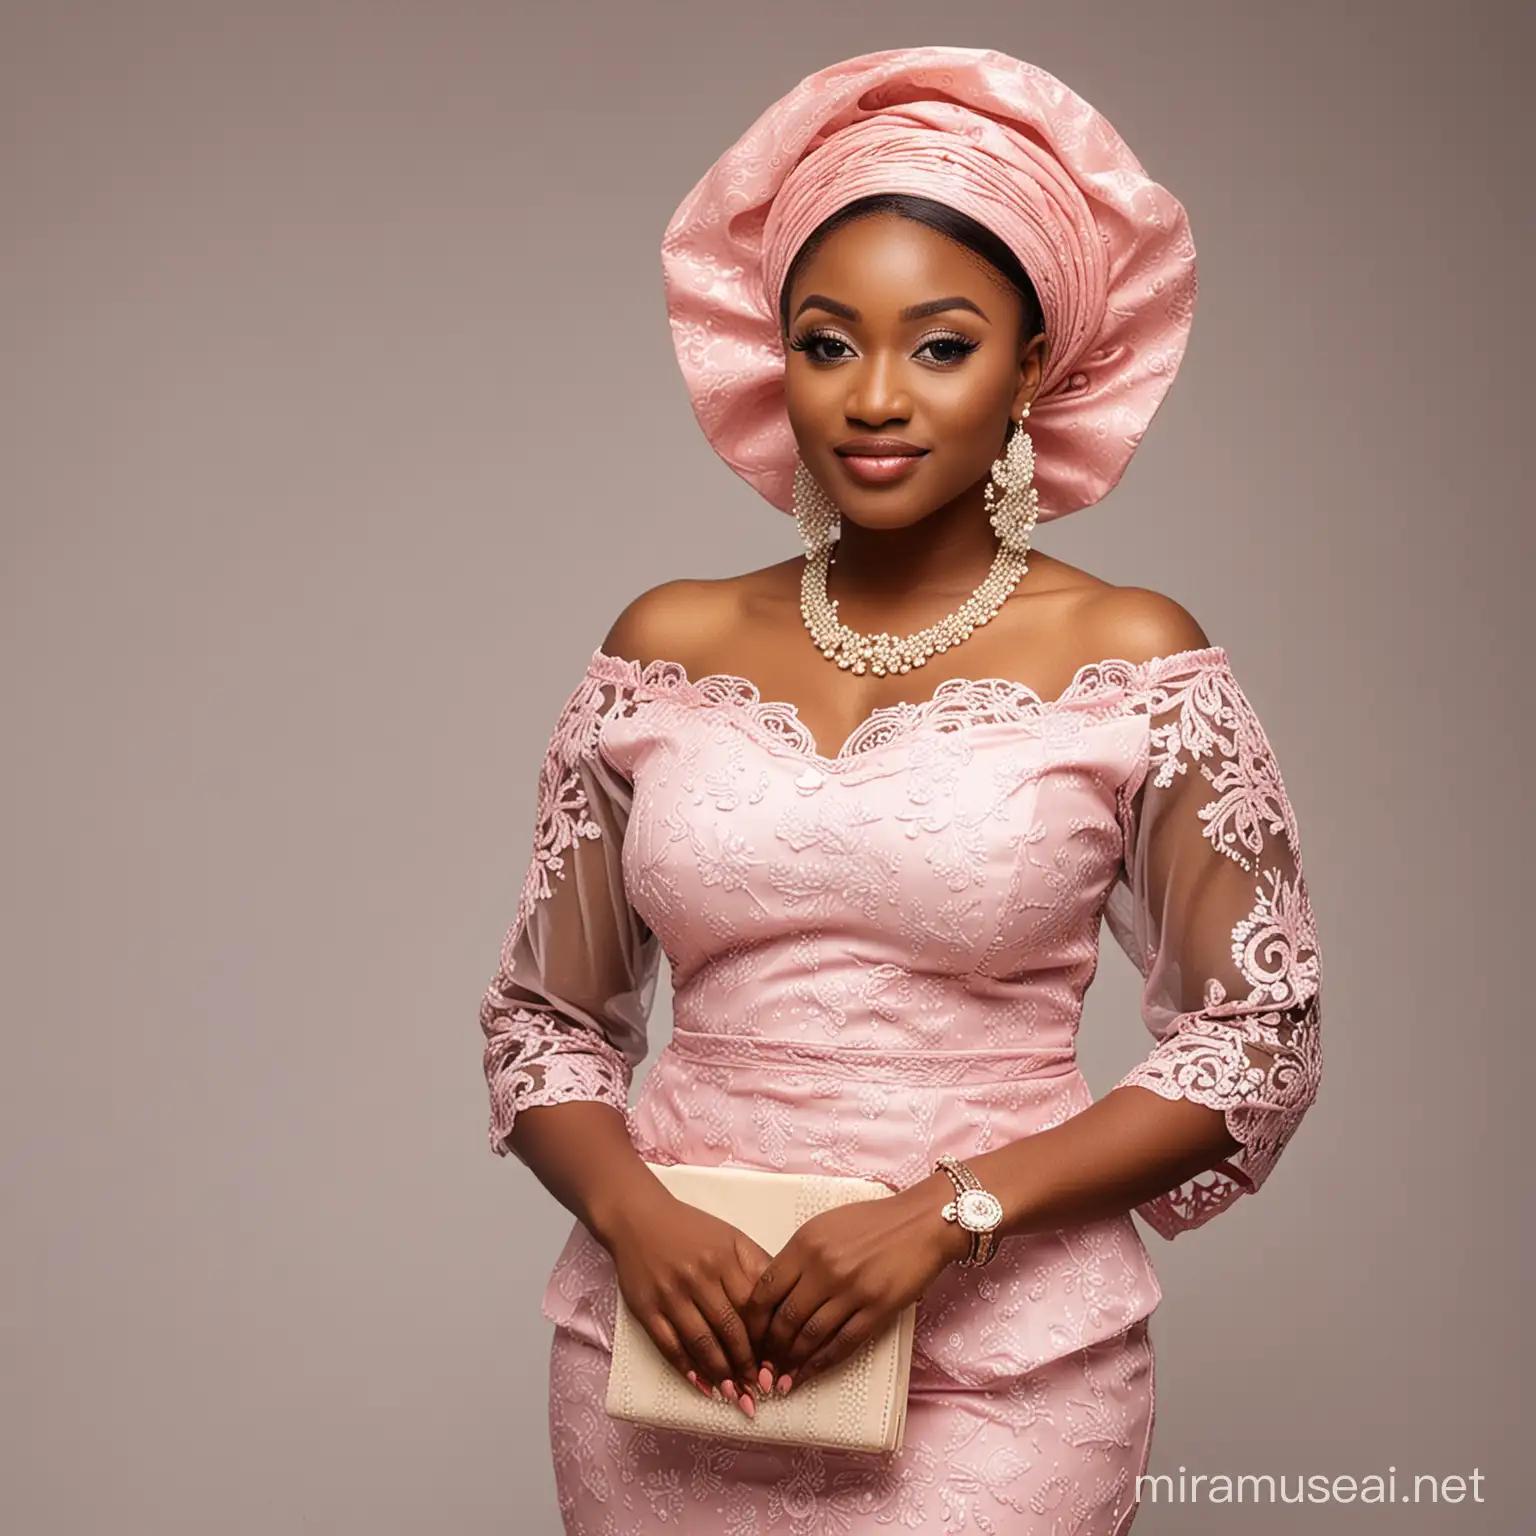 nigerian woman dressed for owambe 

